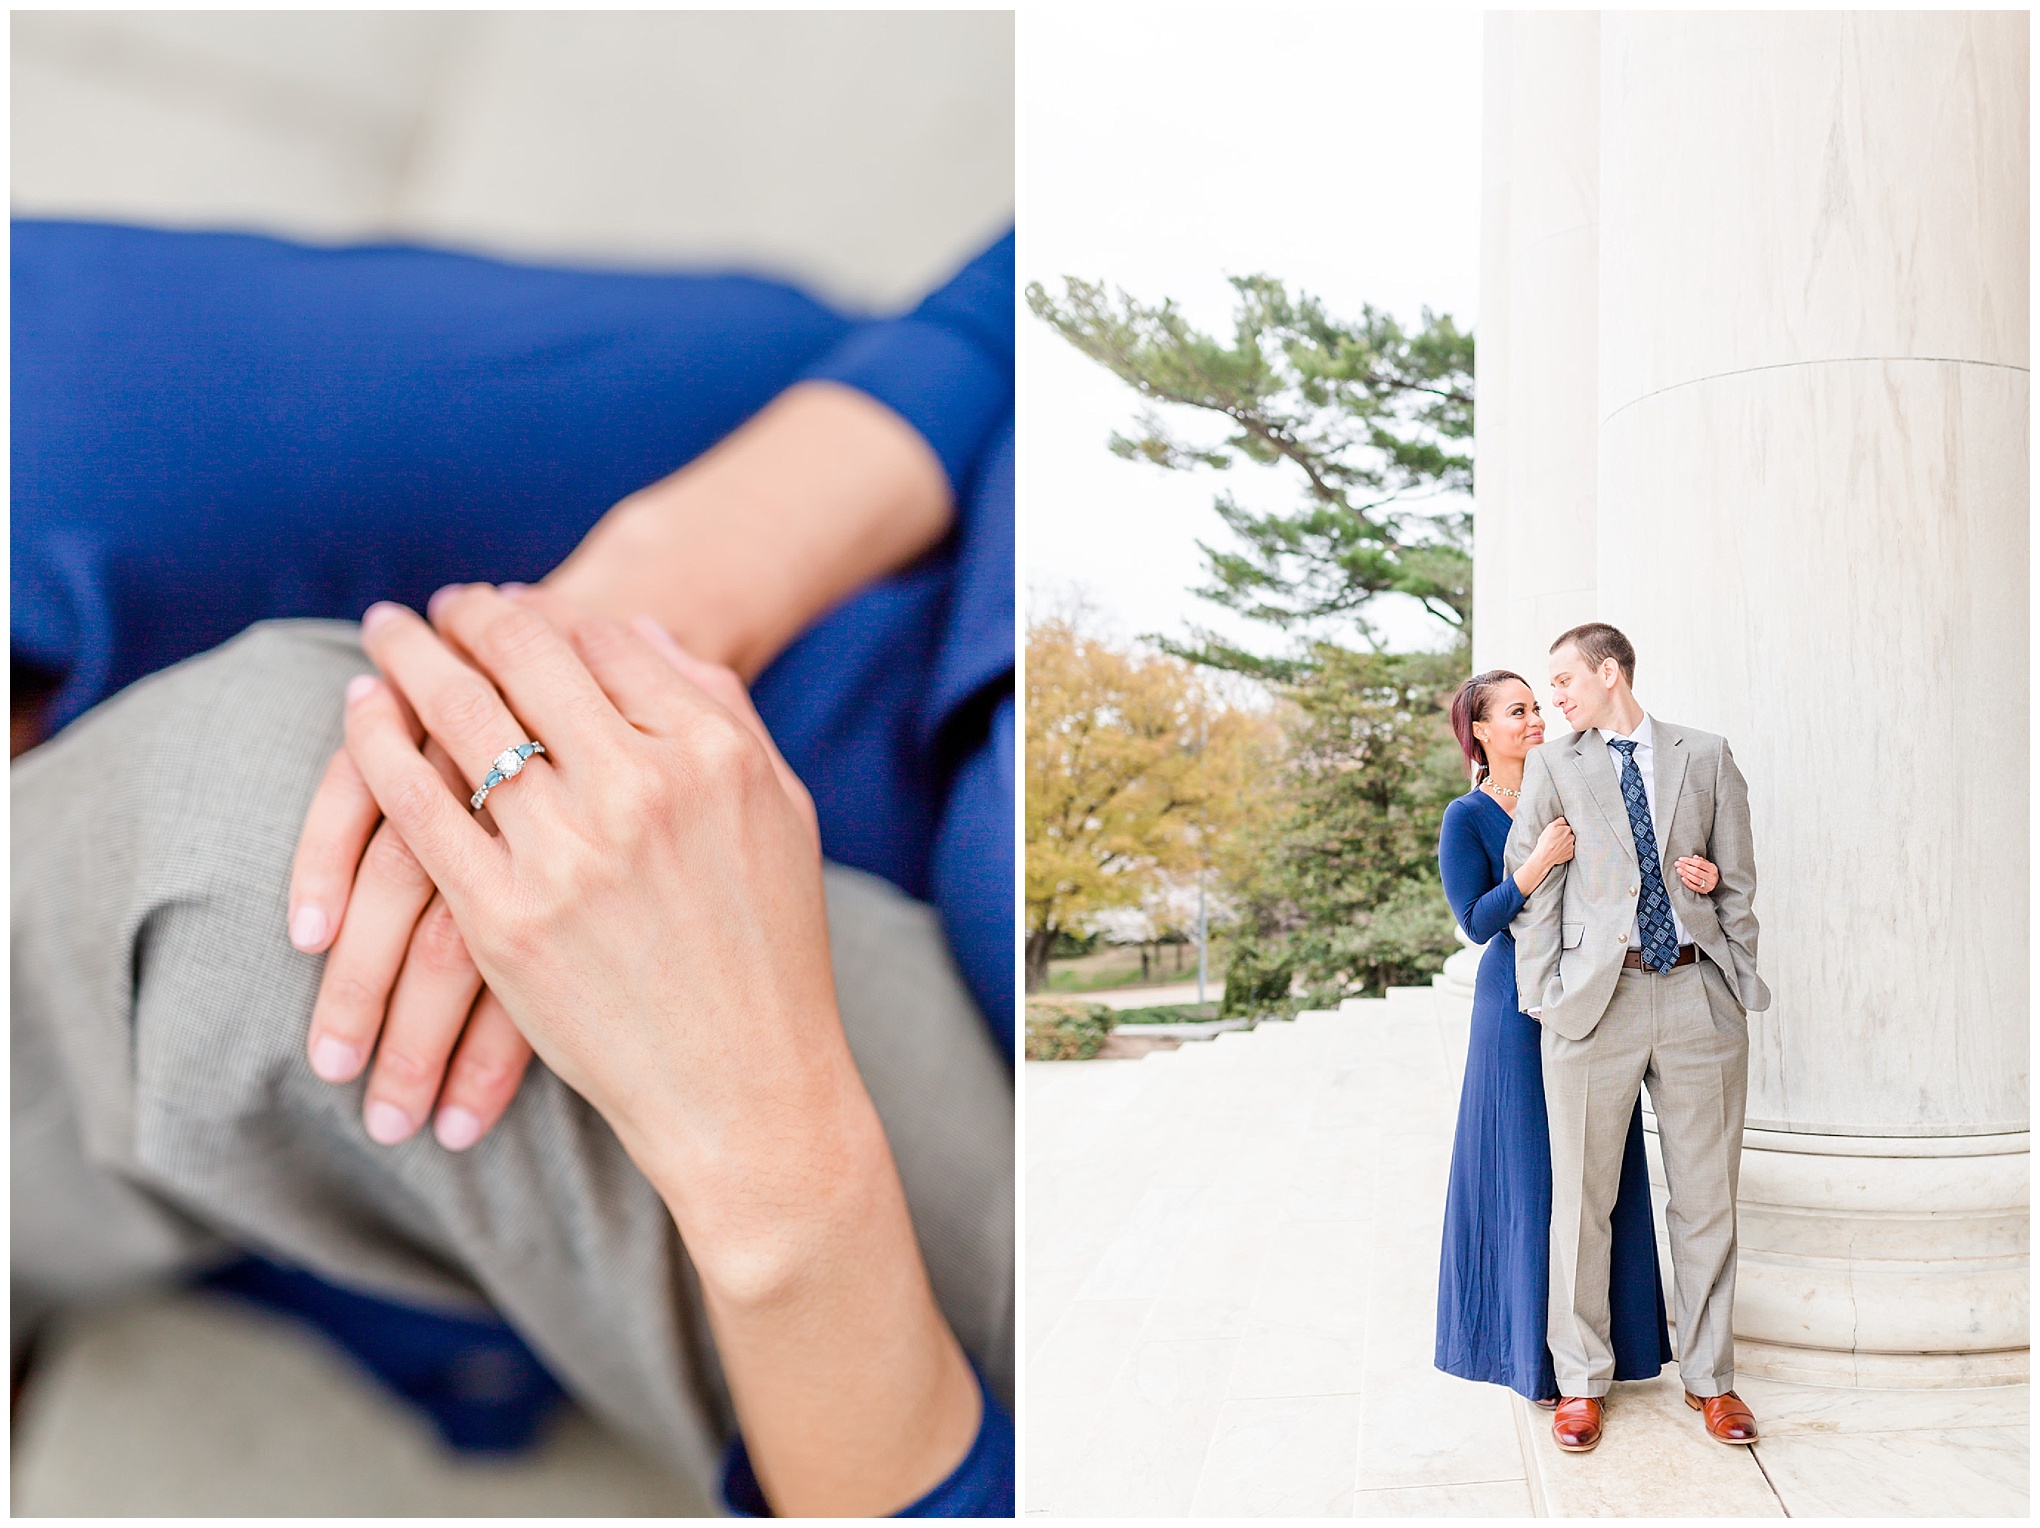 D.C. cherry blossoms engagement session, engagement session, D.C. engagement session, cherry blossoms, D.C. cherry blossoms, photo shoot outfit ideas, long navy wrap dress, long wrap dress, navy wrap dress, tidal basin, waterfront, engagement ring, diamond and auquamarine, aquamarine engagement ring, couple holding hands, Jefferson Memorial, Jefferson Memorial portraits, evergreens